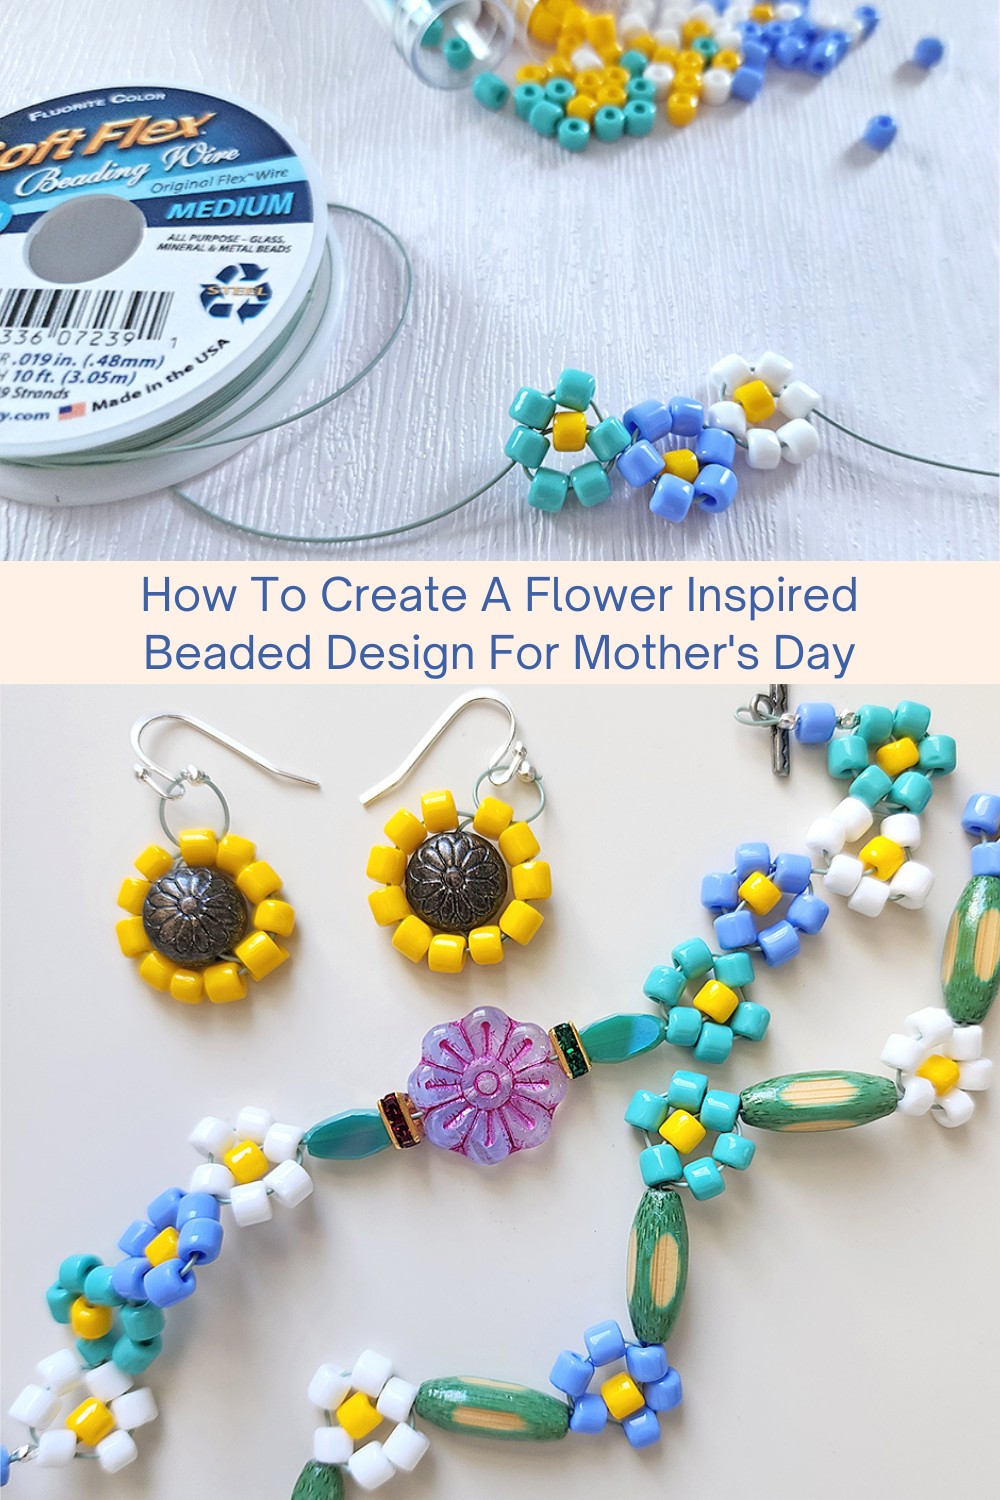 How To Create A Flower Inspired Beaded Design For Mother's Day Collage